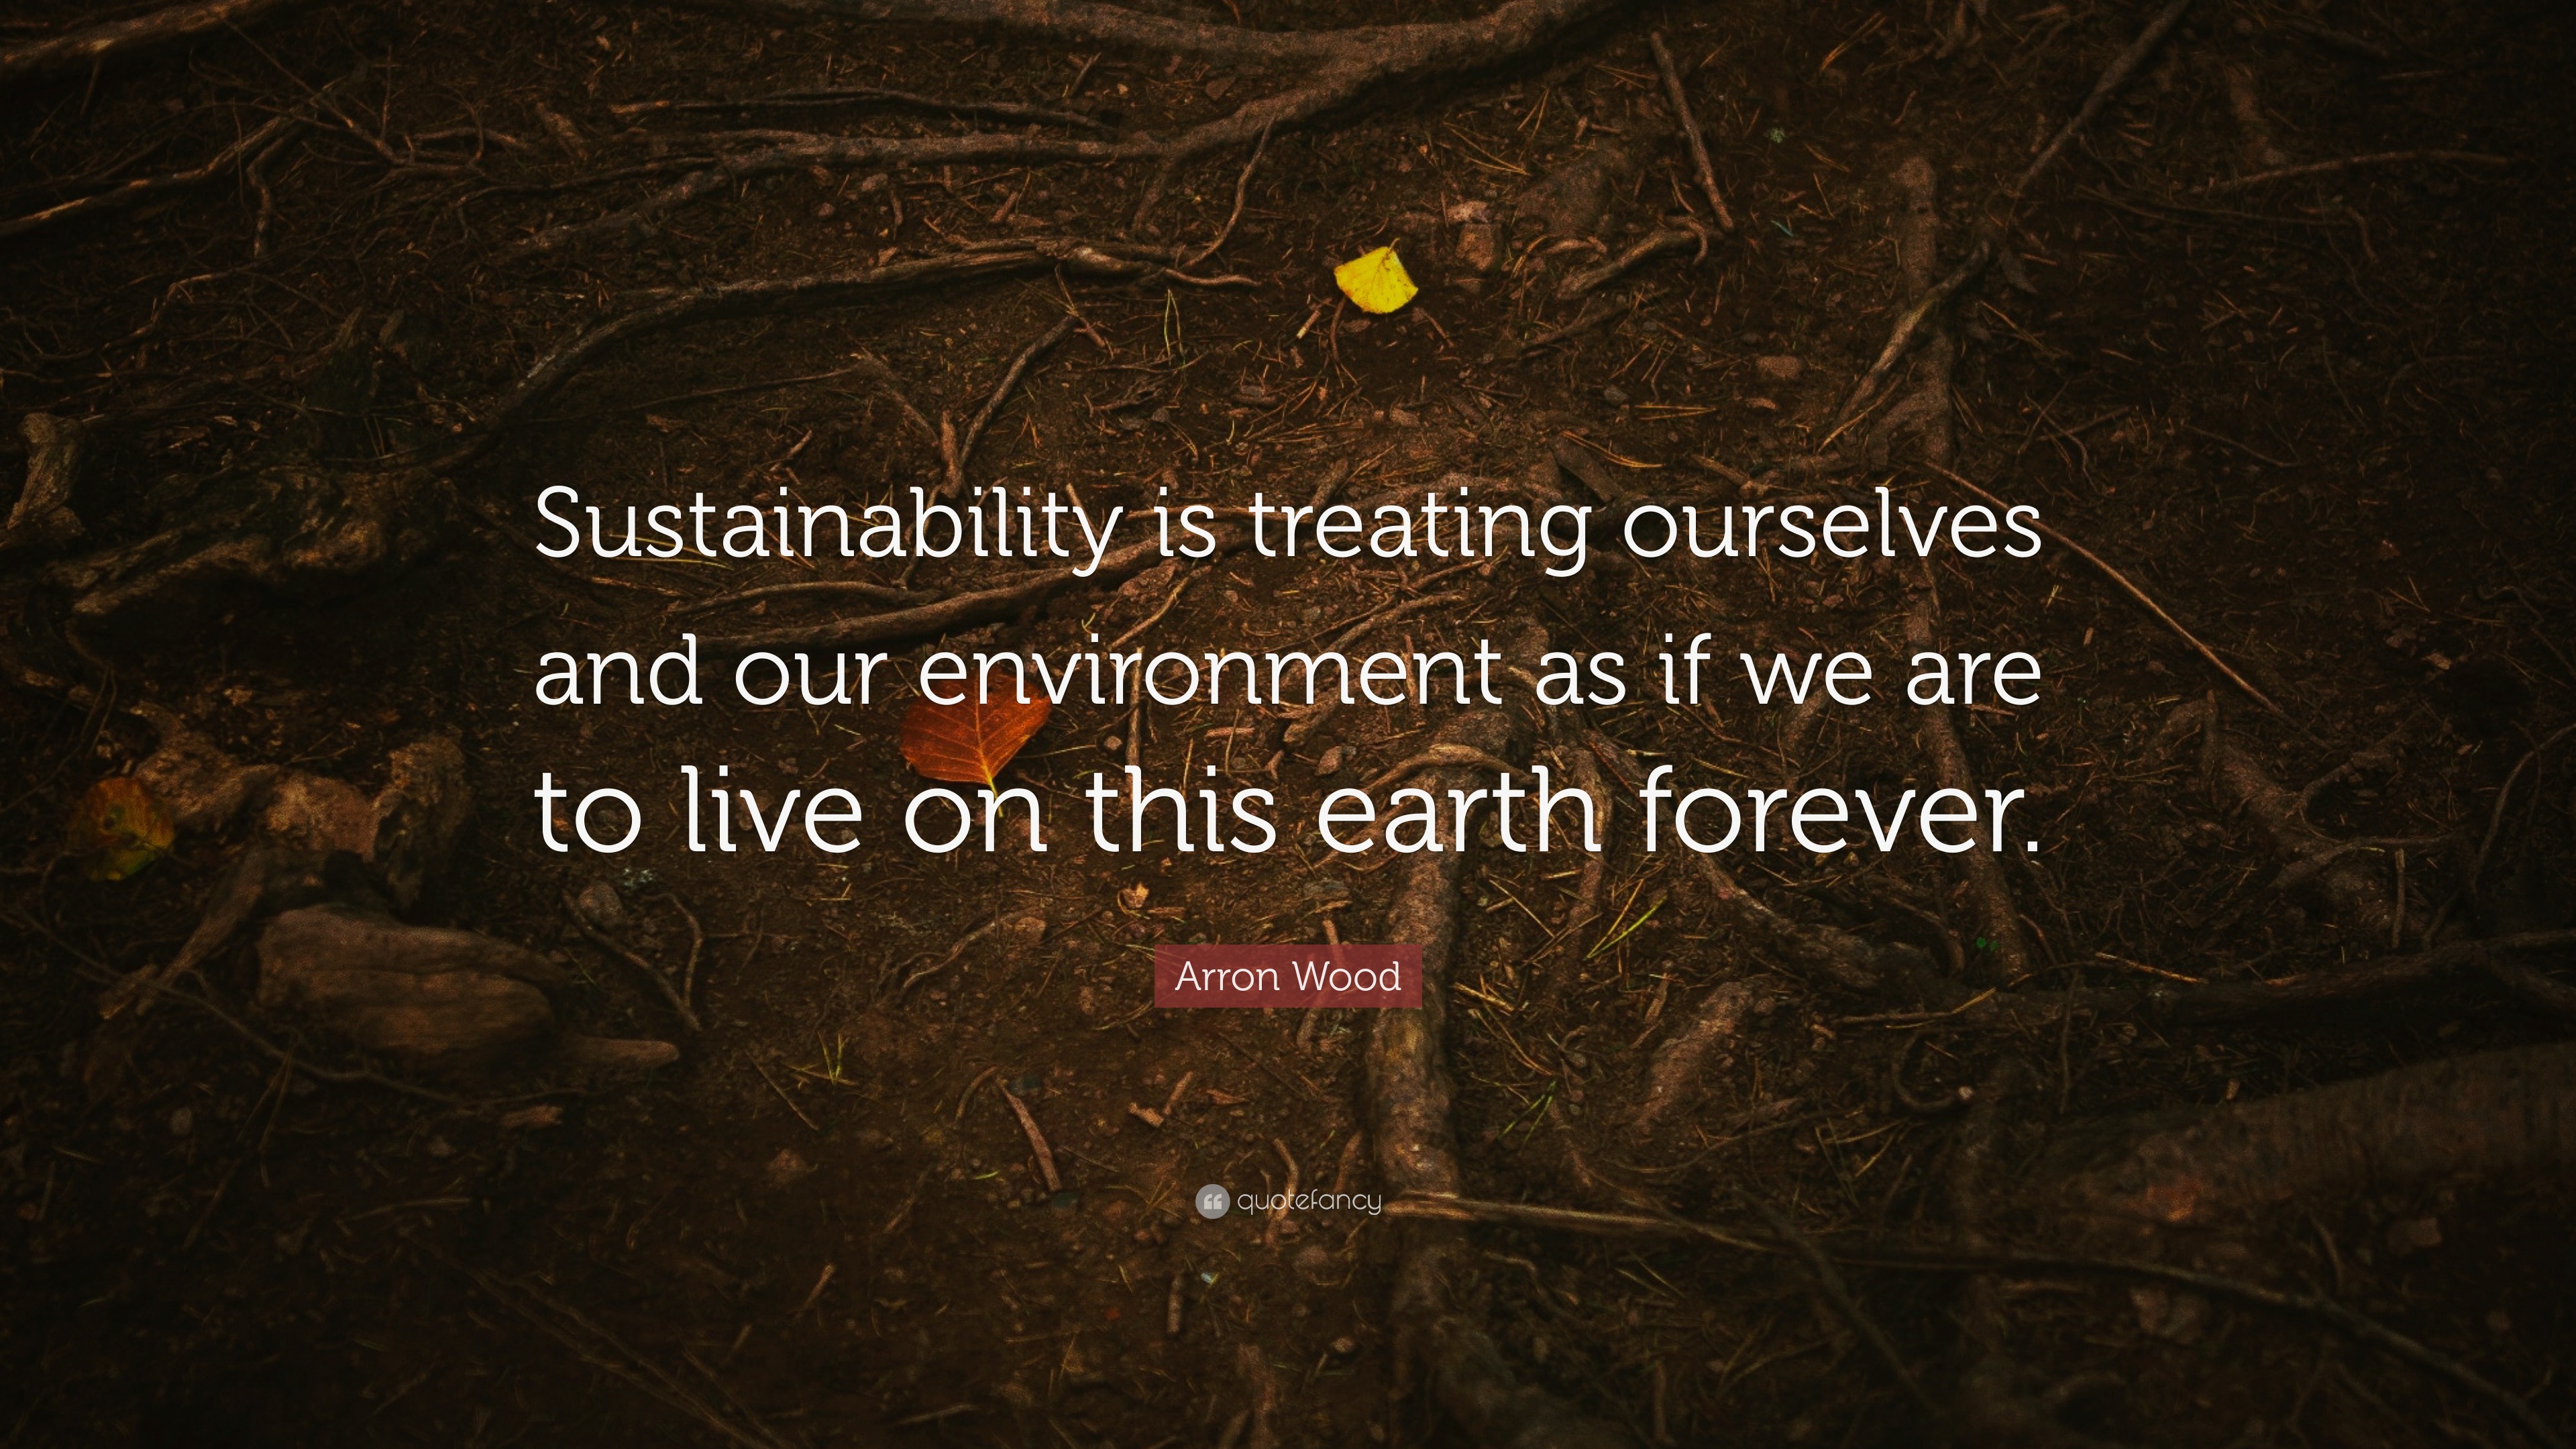 Arron Wood Quote “Sustainability is treating ourselves and our